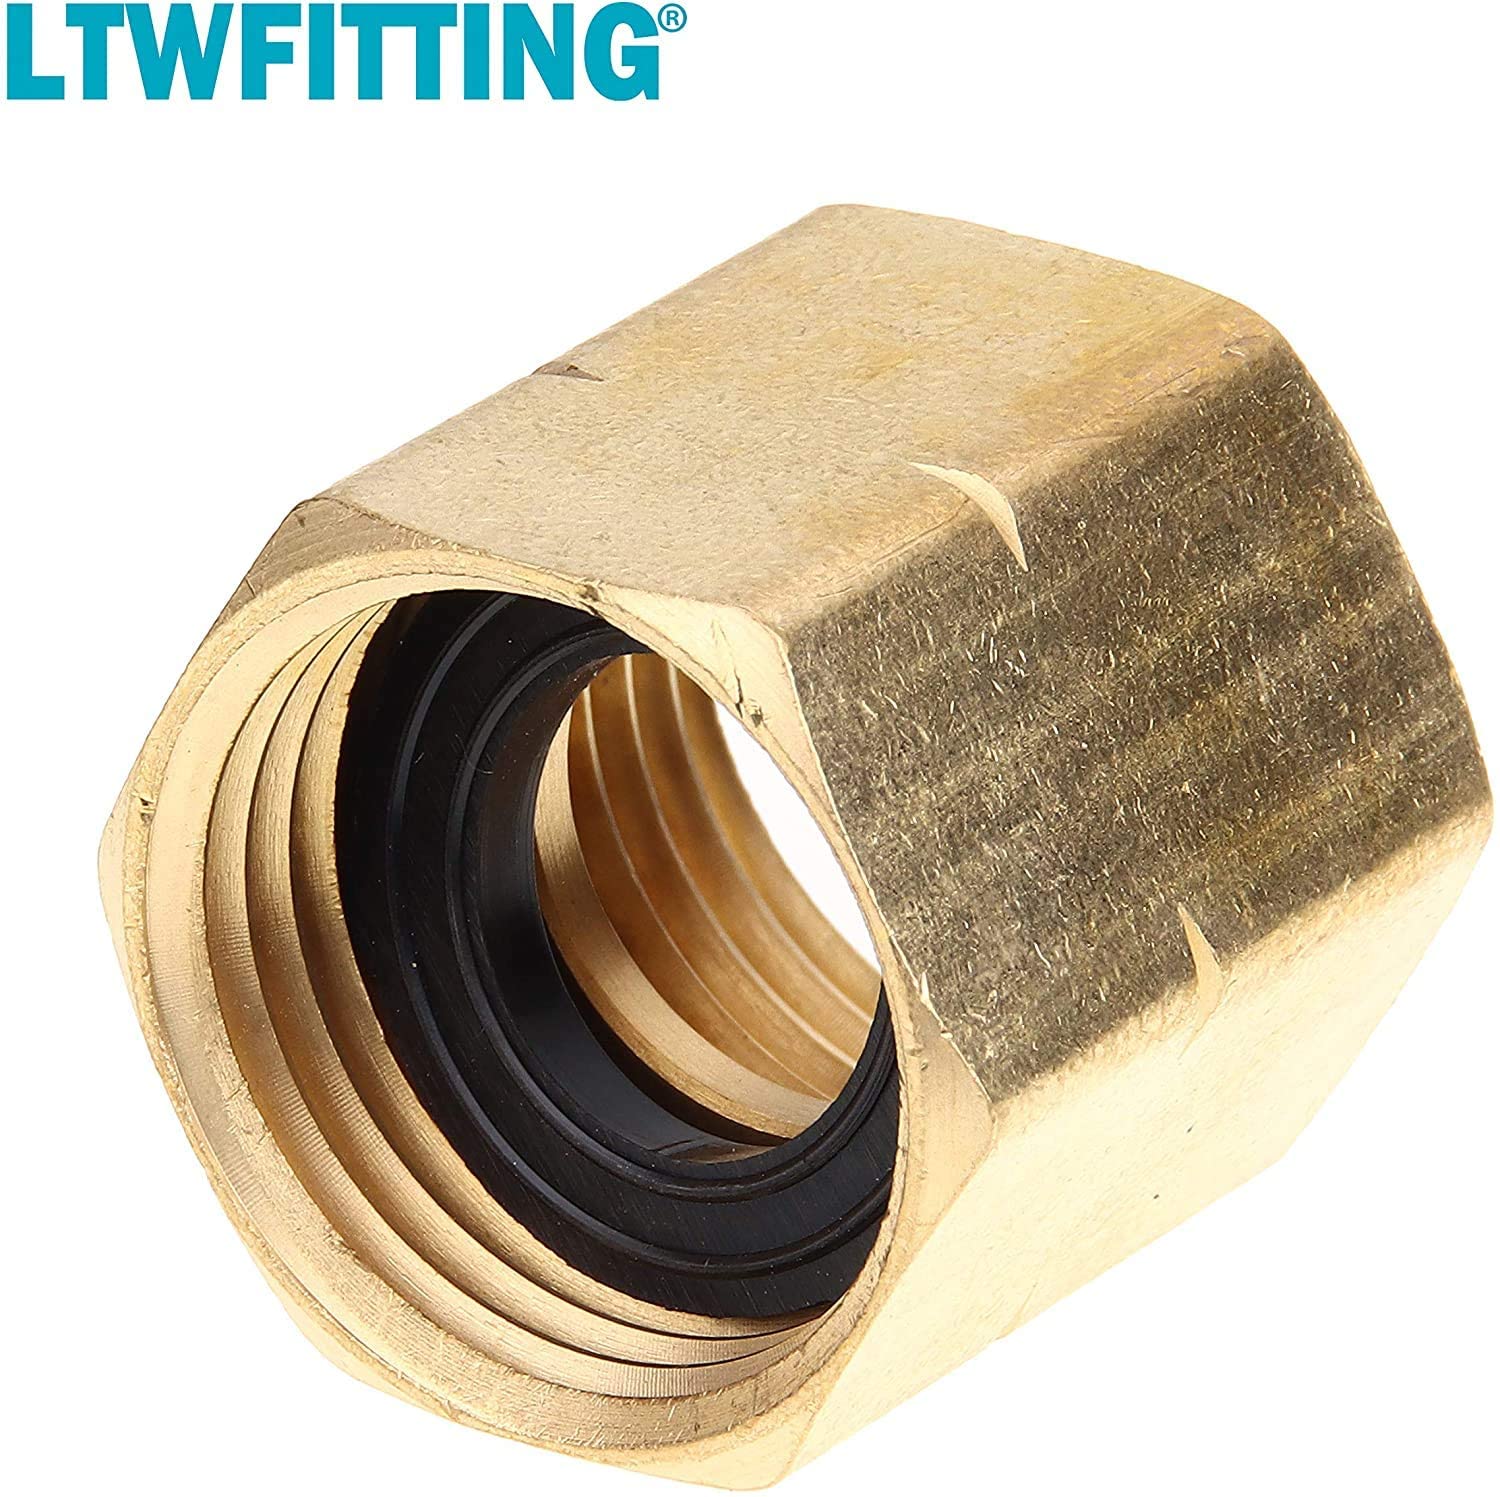 LTWFITTING Inch FHT x 3/4 Inch FHT Hex Brass Hose Adapter,Garden Hose Fitting(Pack of 100)